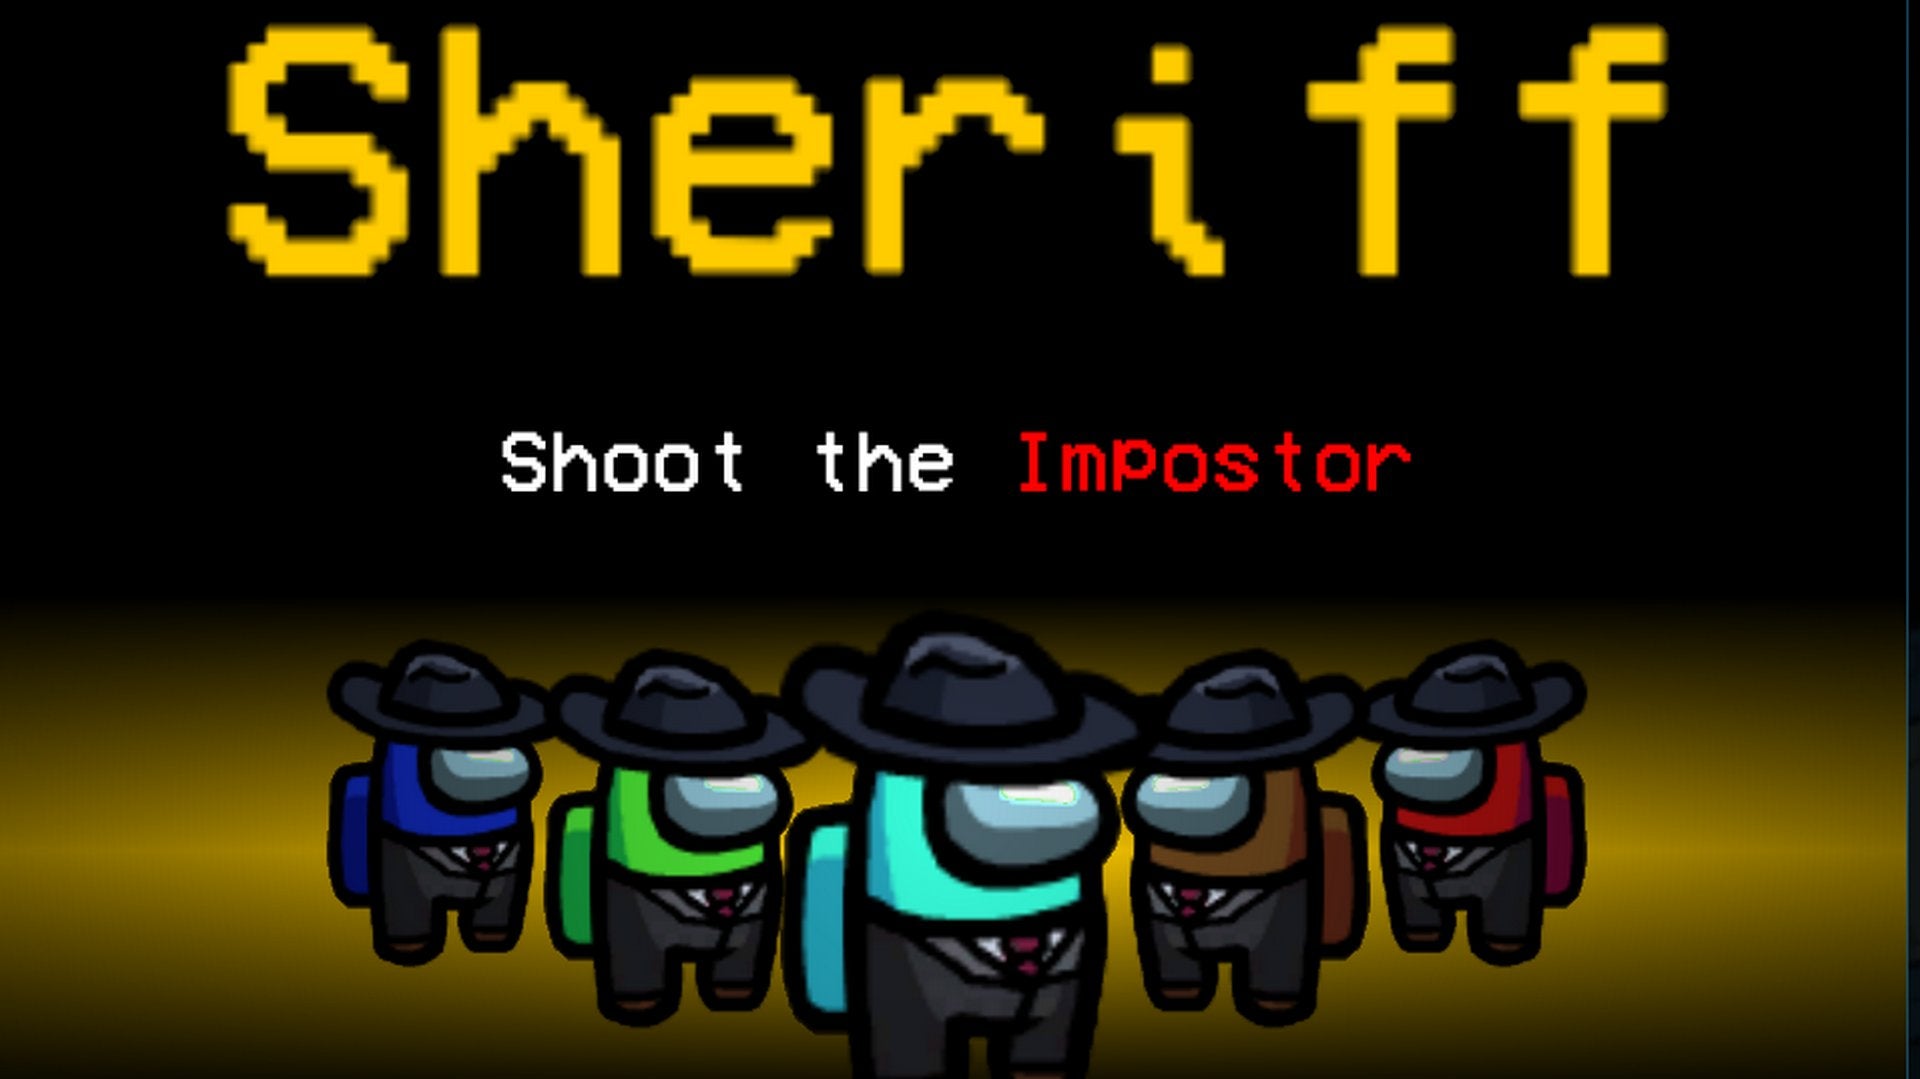 The title screen for the Sheriff Among Us mod